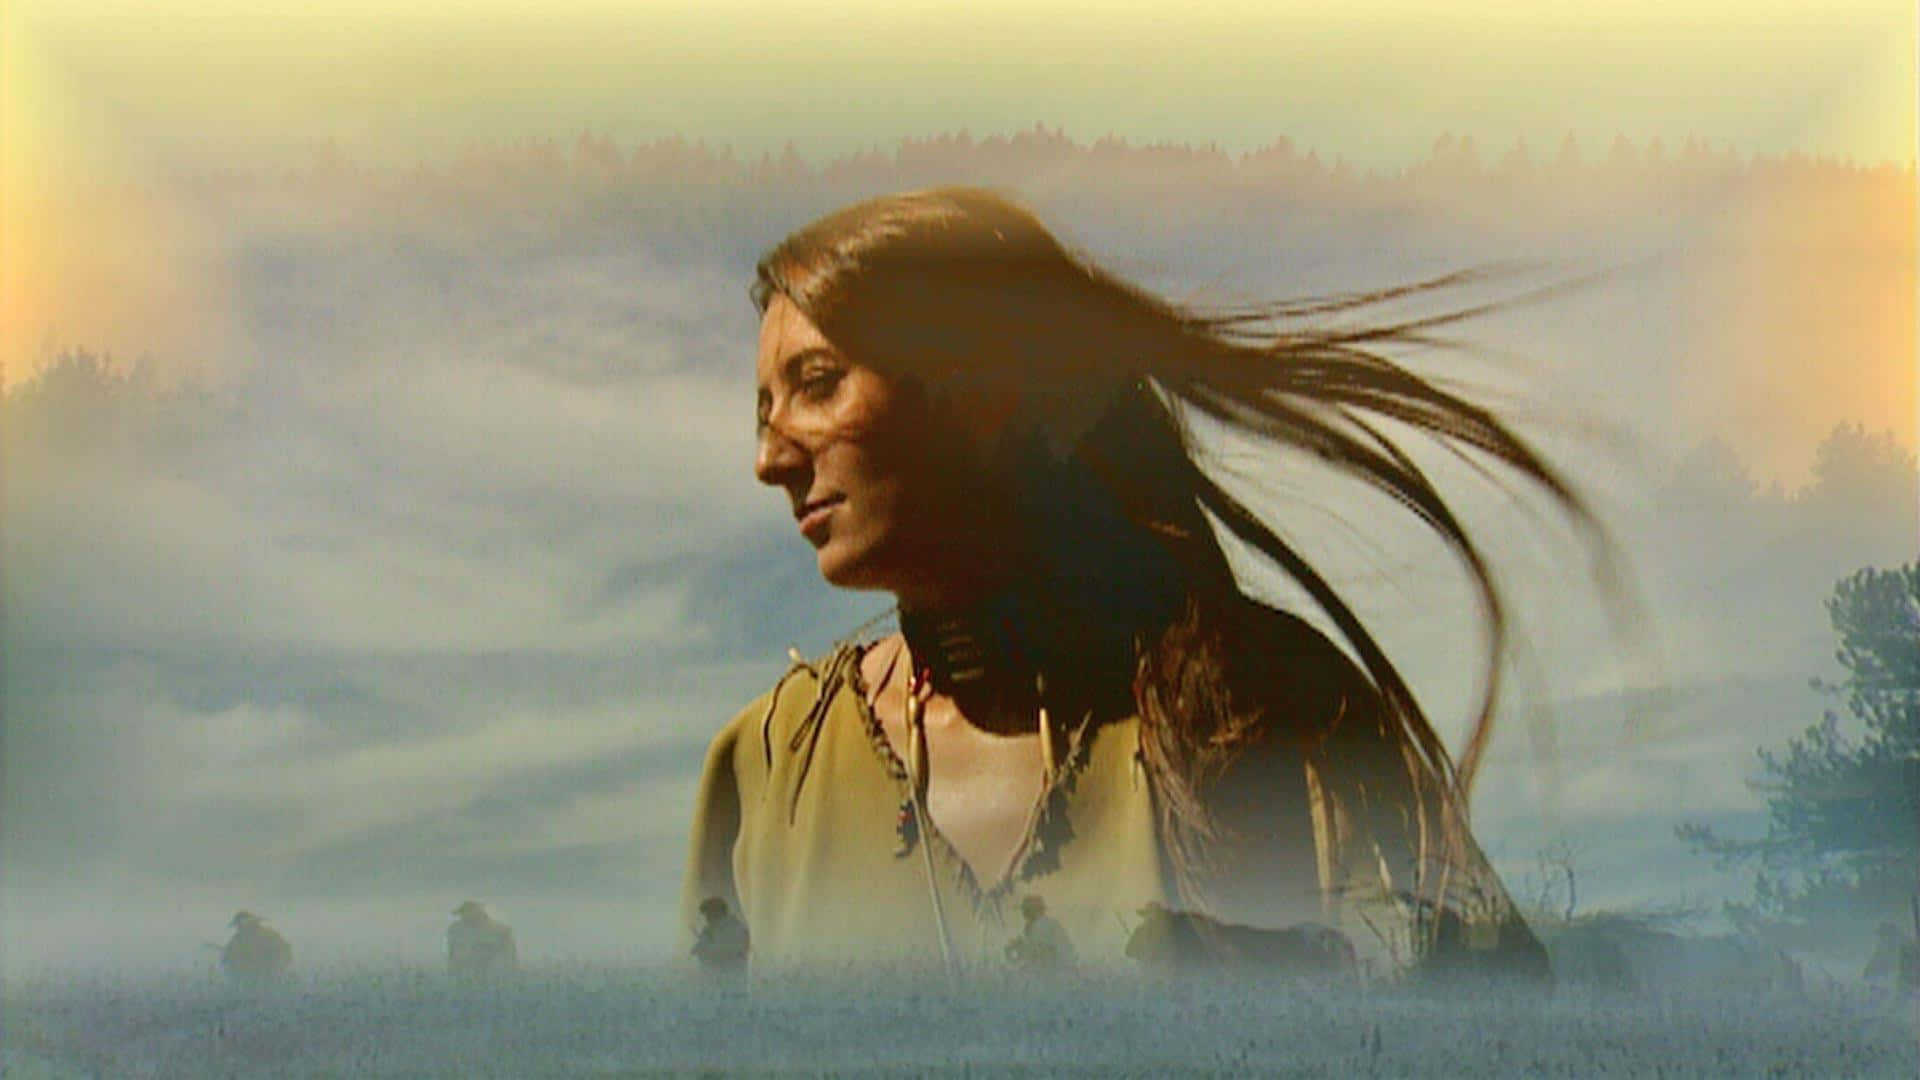 A Woman With Long Hair In A Field